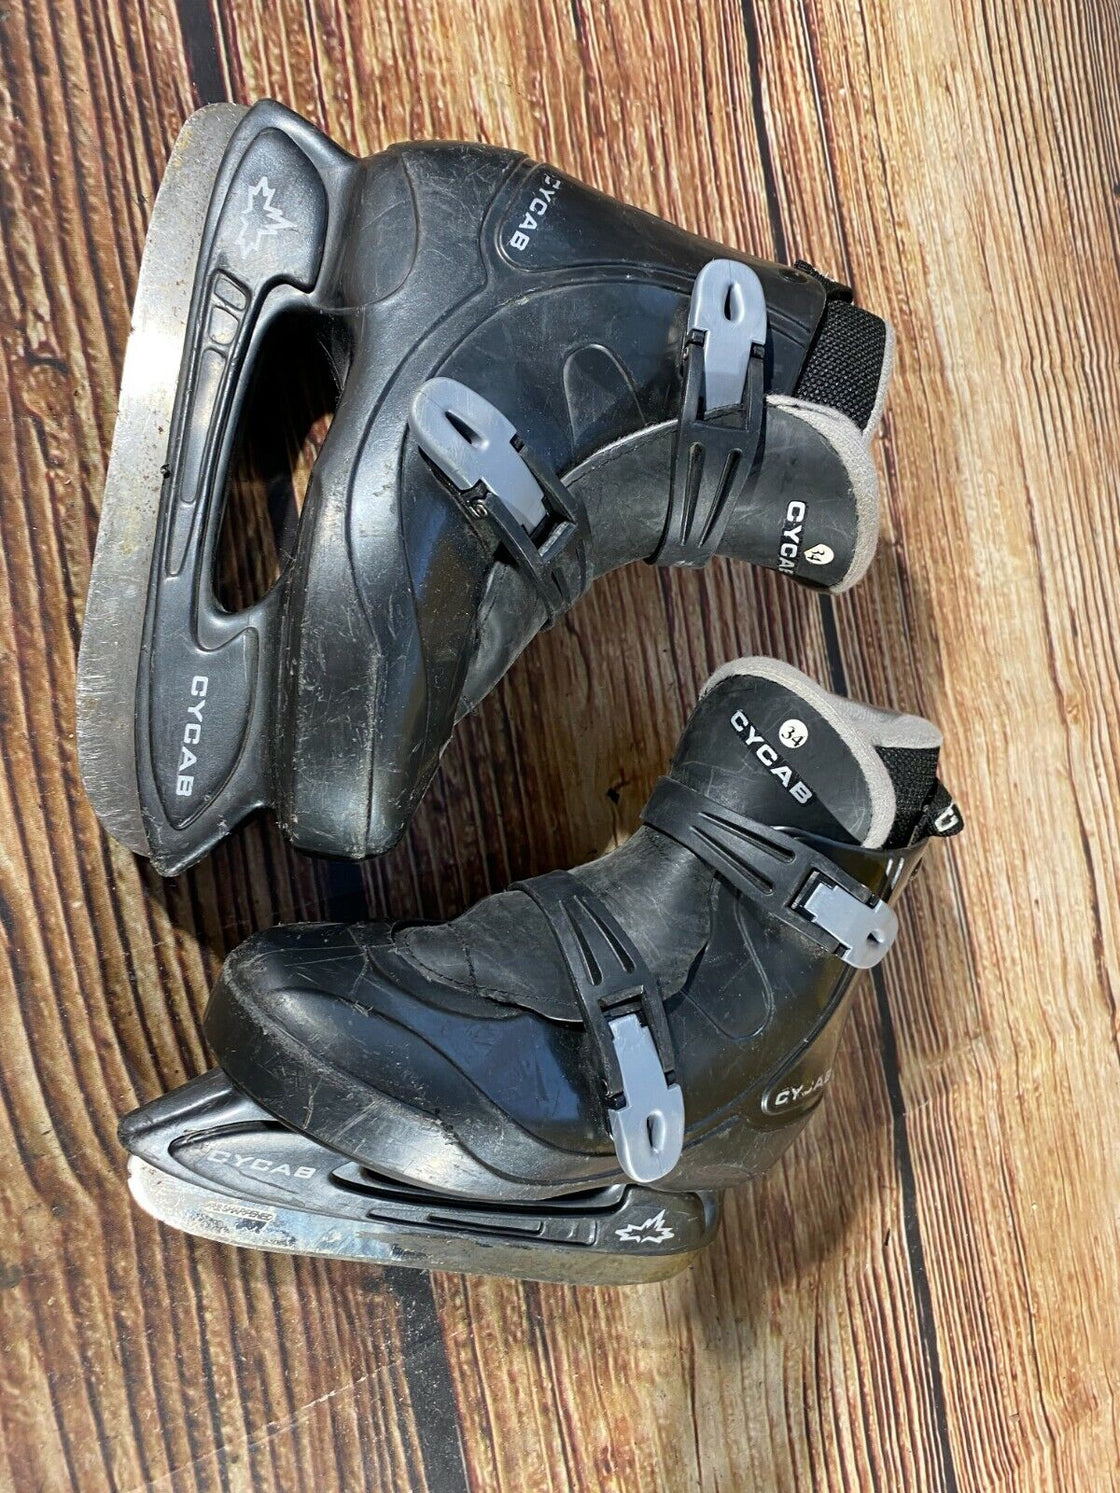 CYCAB Ice Skates for Recreational Winter Skating or Sports Kids / Youth EU34